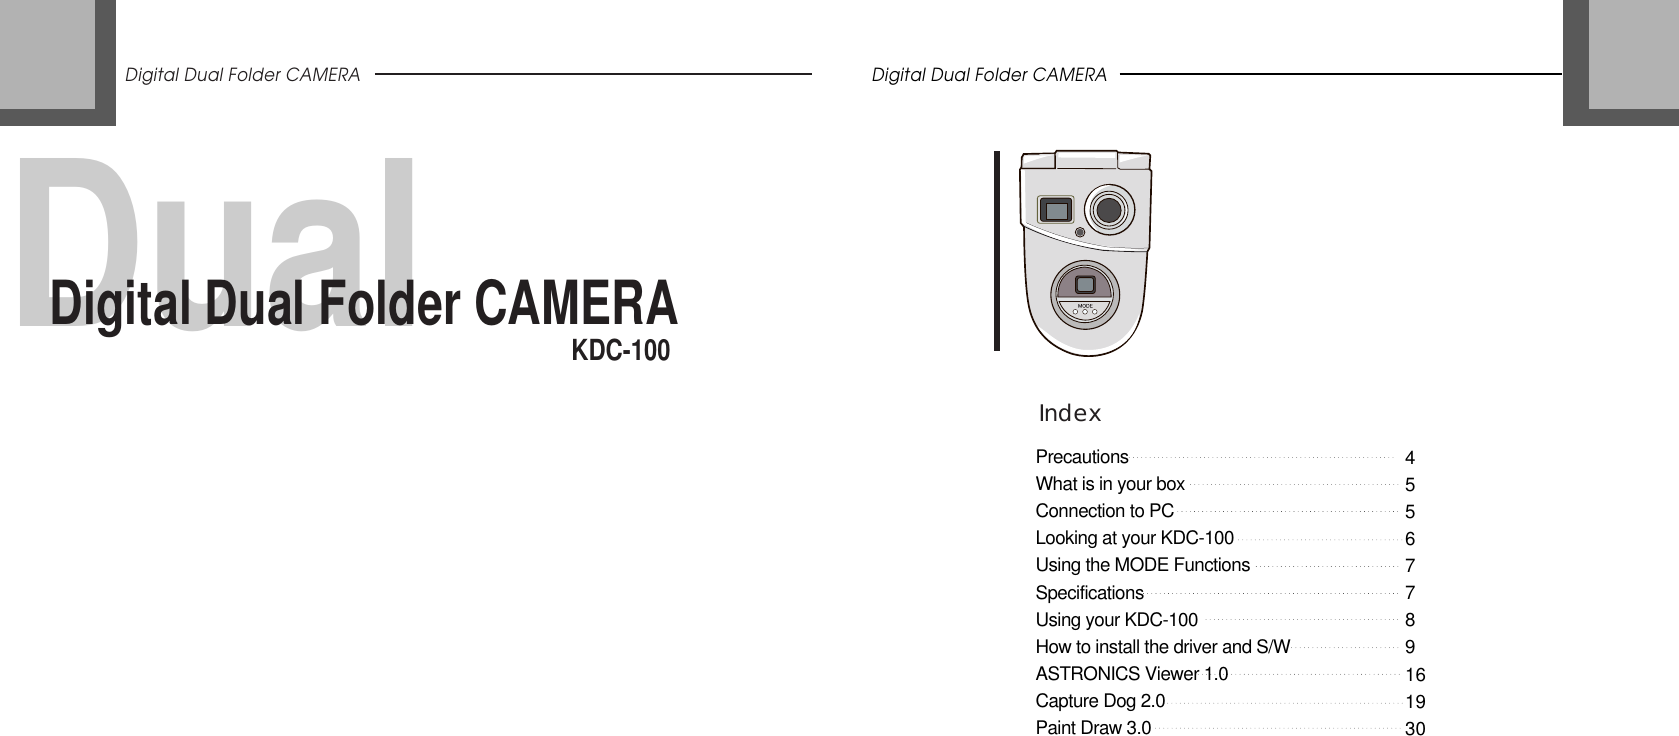 DualDigital Dual Folder CAMERADigital Dual Folder CAMERAKDC-100IndexDigital Dual Folder CAMERAPrecautionsWhat is in your boxConnection to PCLooking at your KDC-100Using the MODE FunctionsSpecificationsUsing your KDC-100How to install the driver and S/WASTRONICS Viewer 1.0Capture Dog 2.0Paint Draw 3.045567789161930